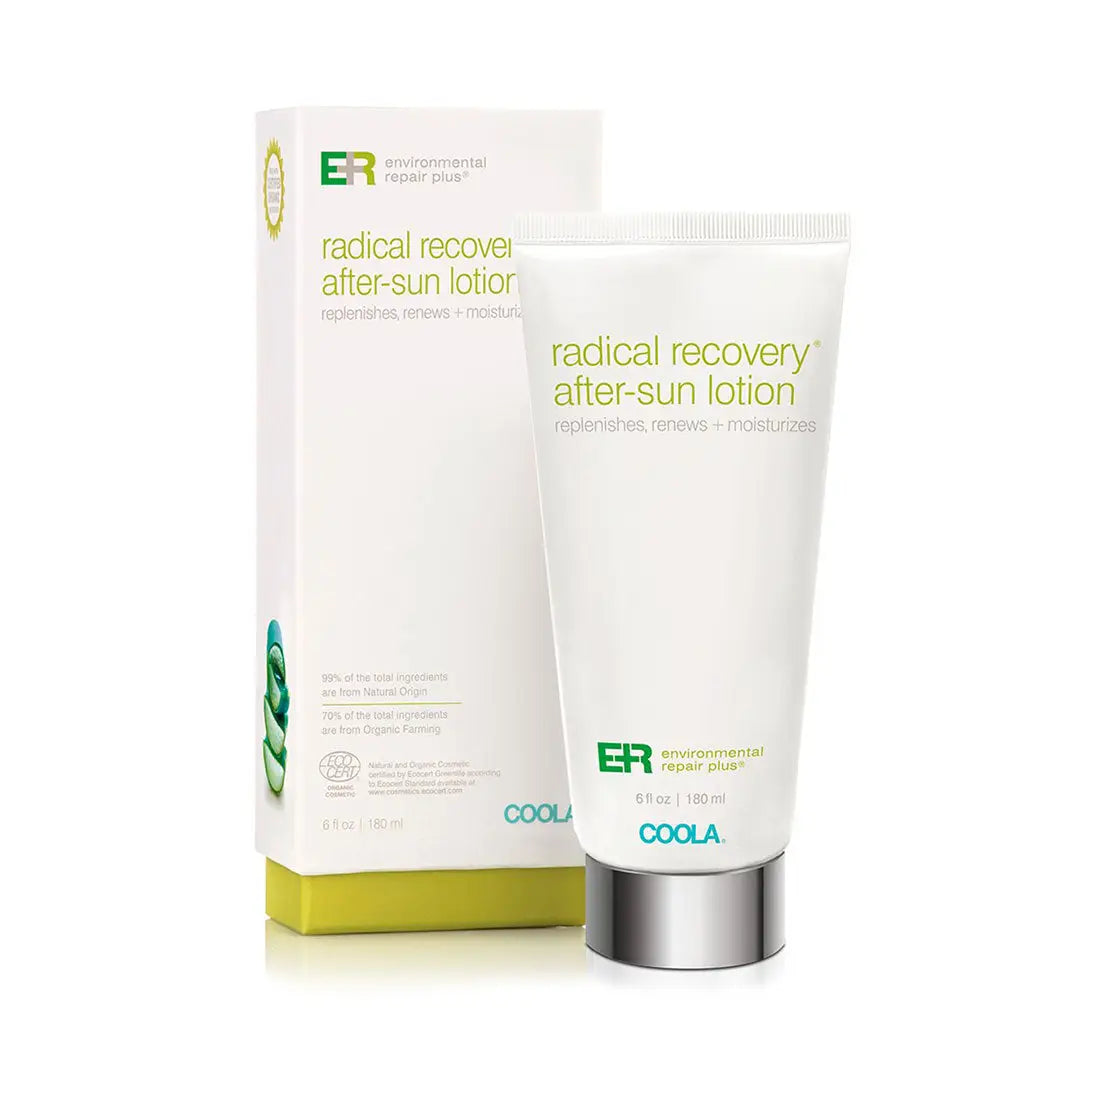 Coola Radical Recovery After-Sun Lotion 180ml